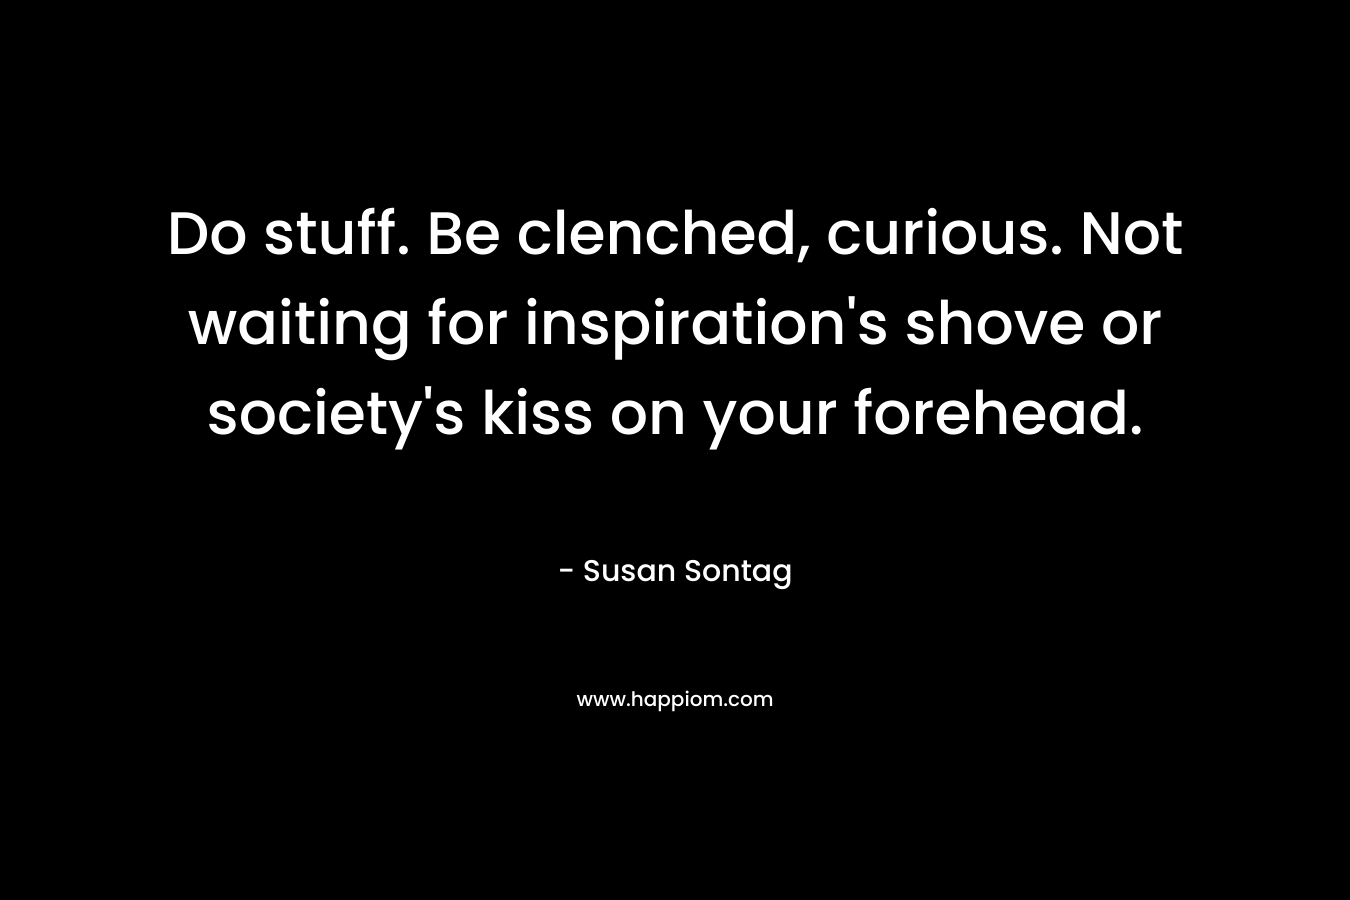 Do stuff. Be clenched, curious. Not waiting for inspiration's shove or society's kiss on your forehead.